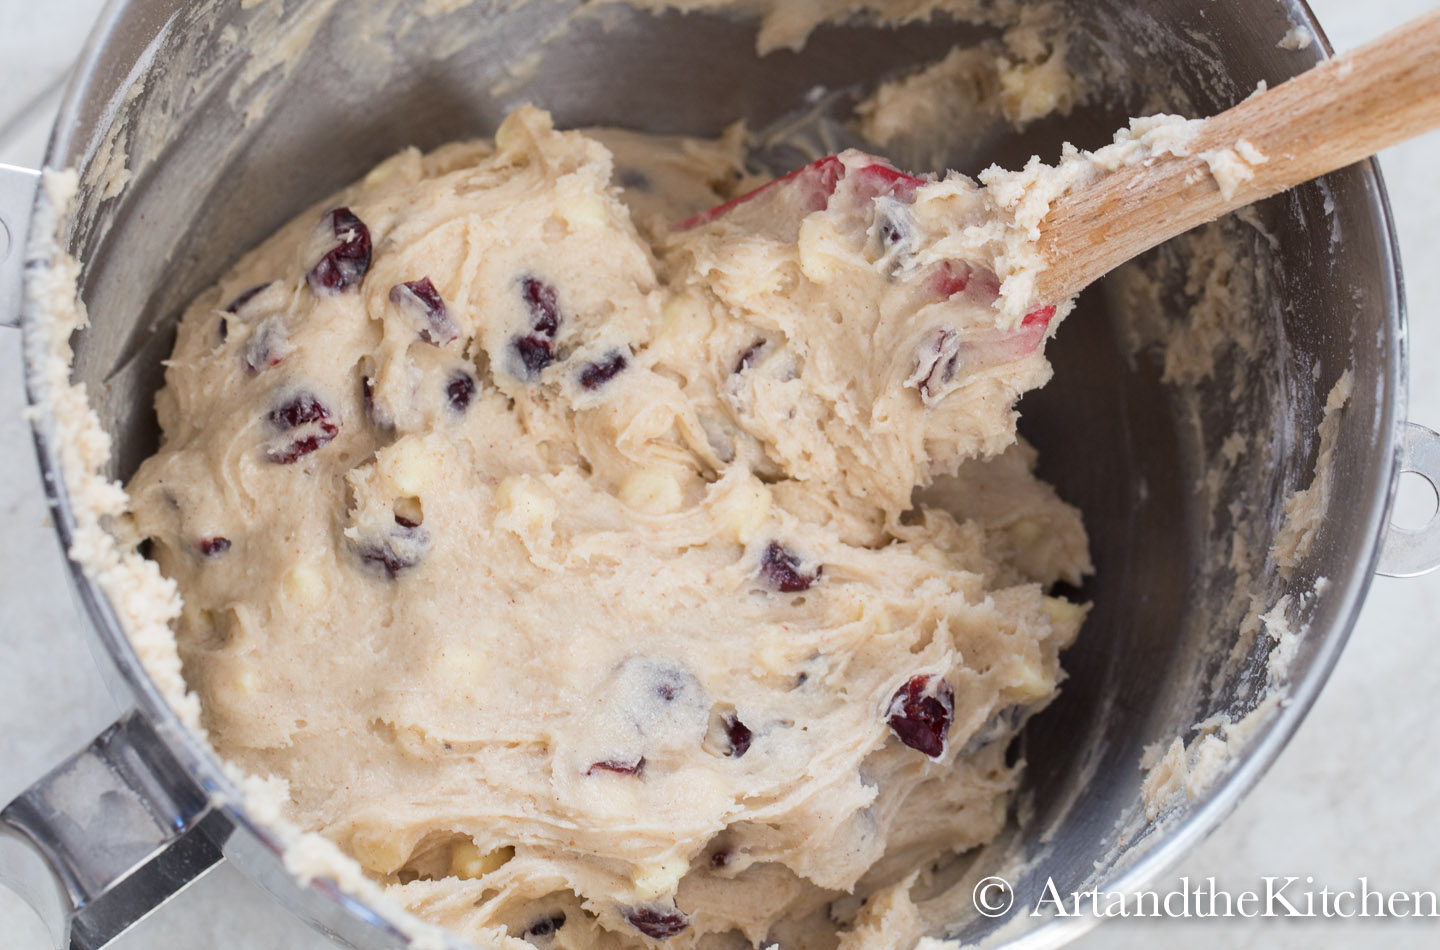 Stainless steel mixing bowl filled with cookie dough with cranberries in it.